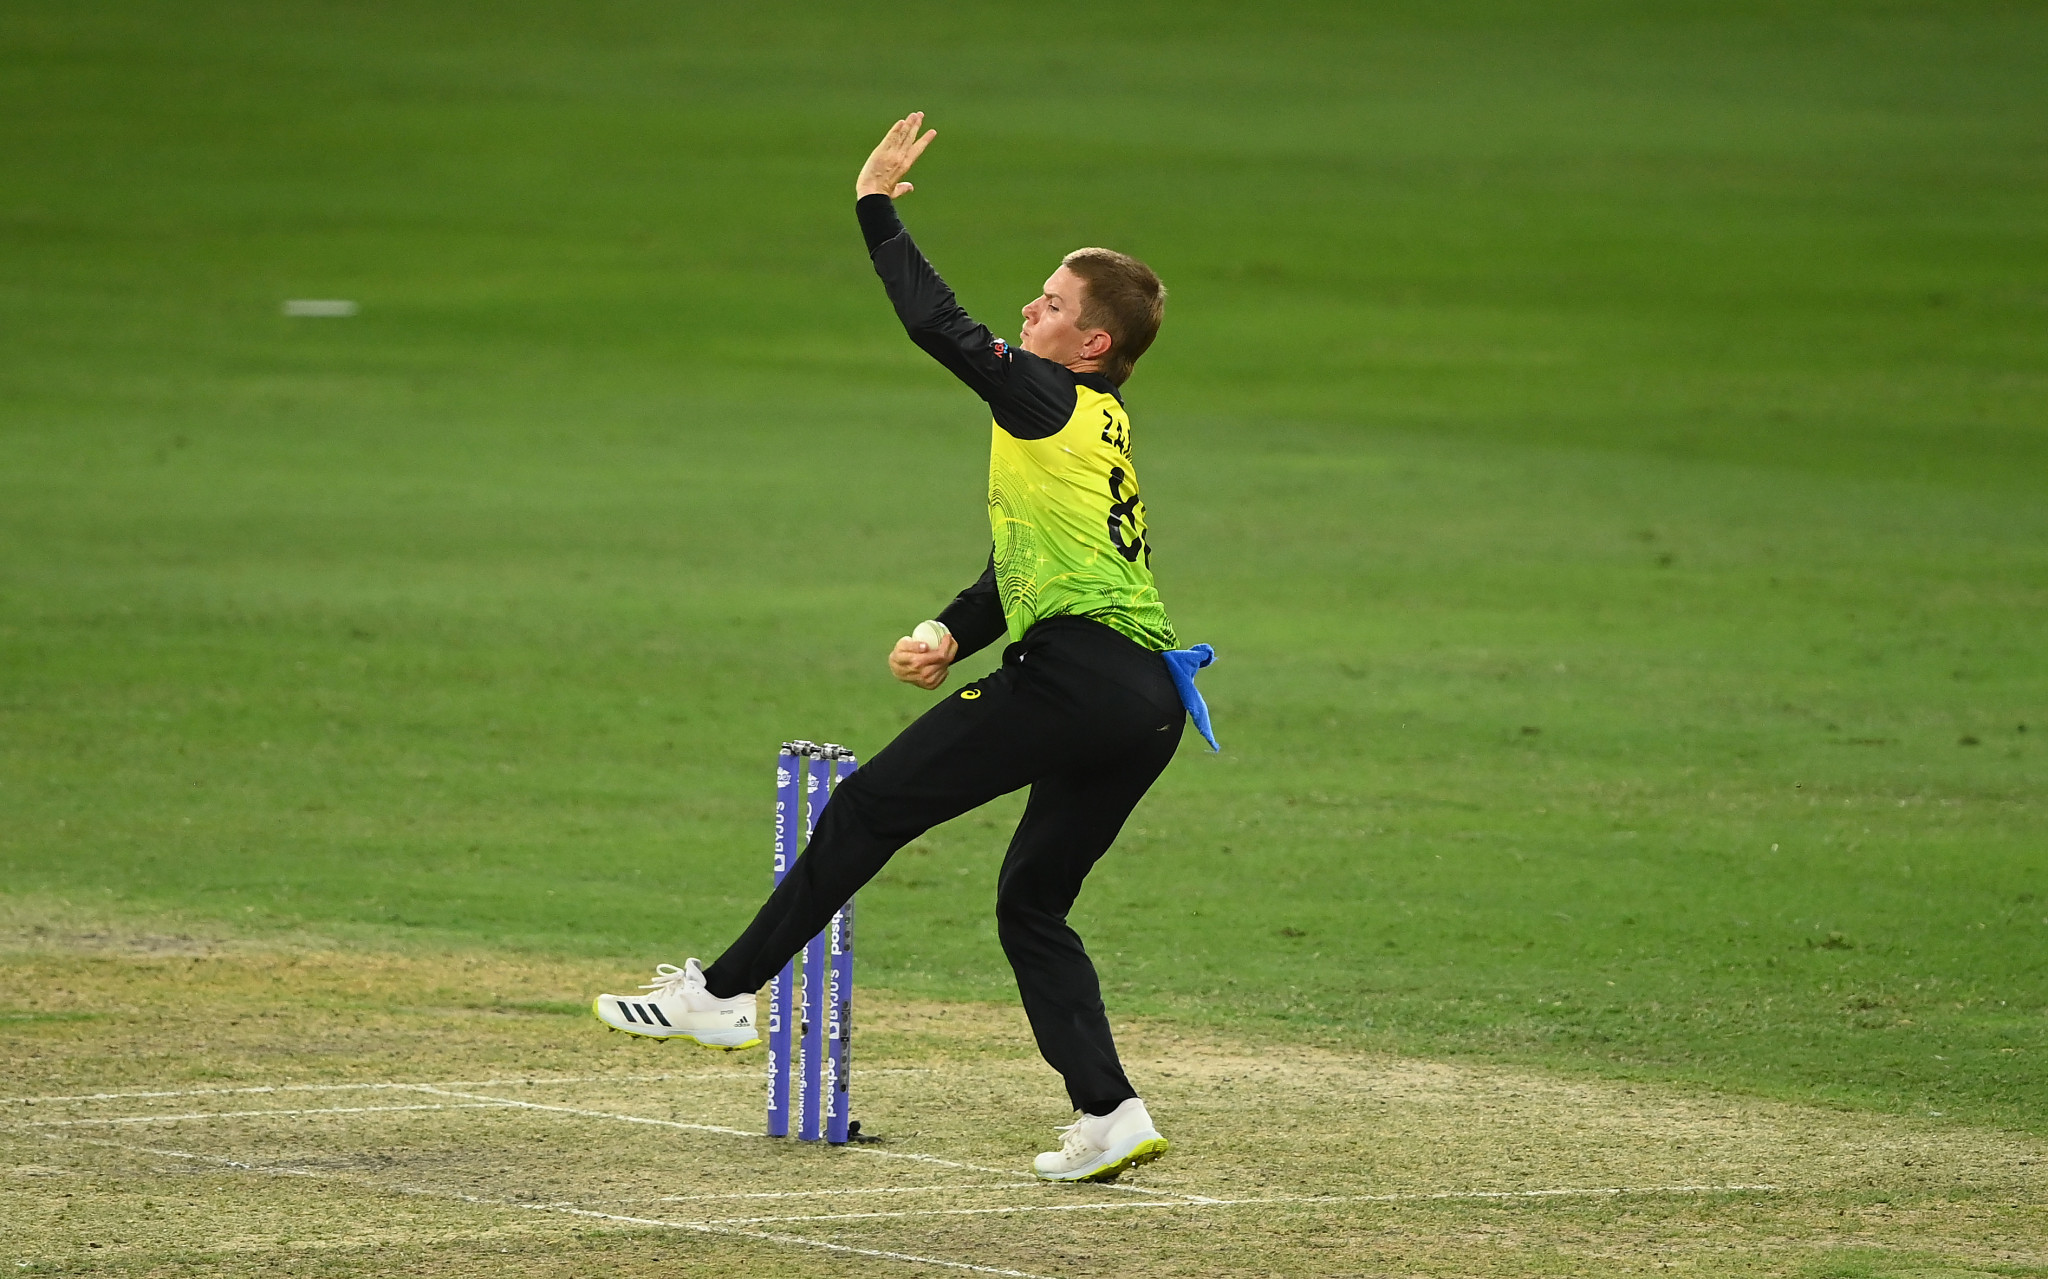 Adam Zampa registered the best bowling performance of his career with five wickets for 19 runs against Bangladesh ©Getty Images